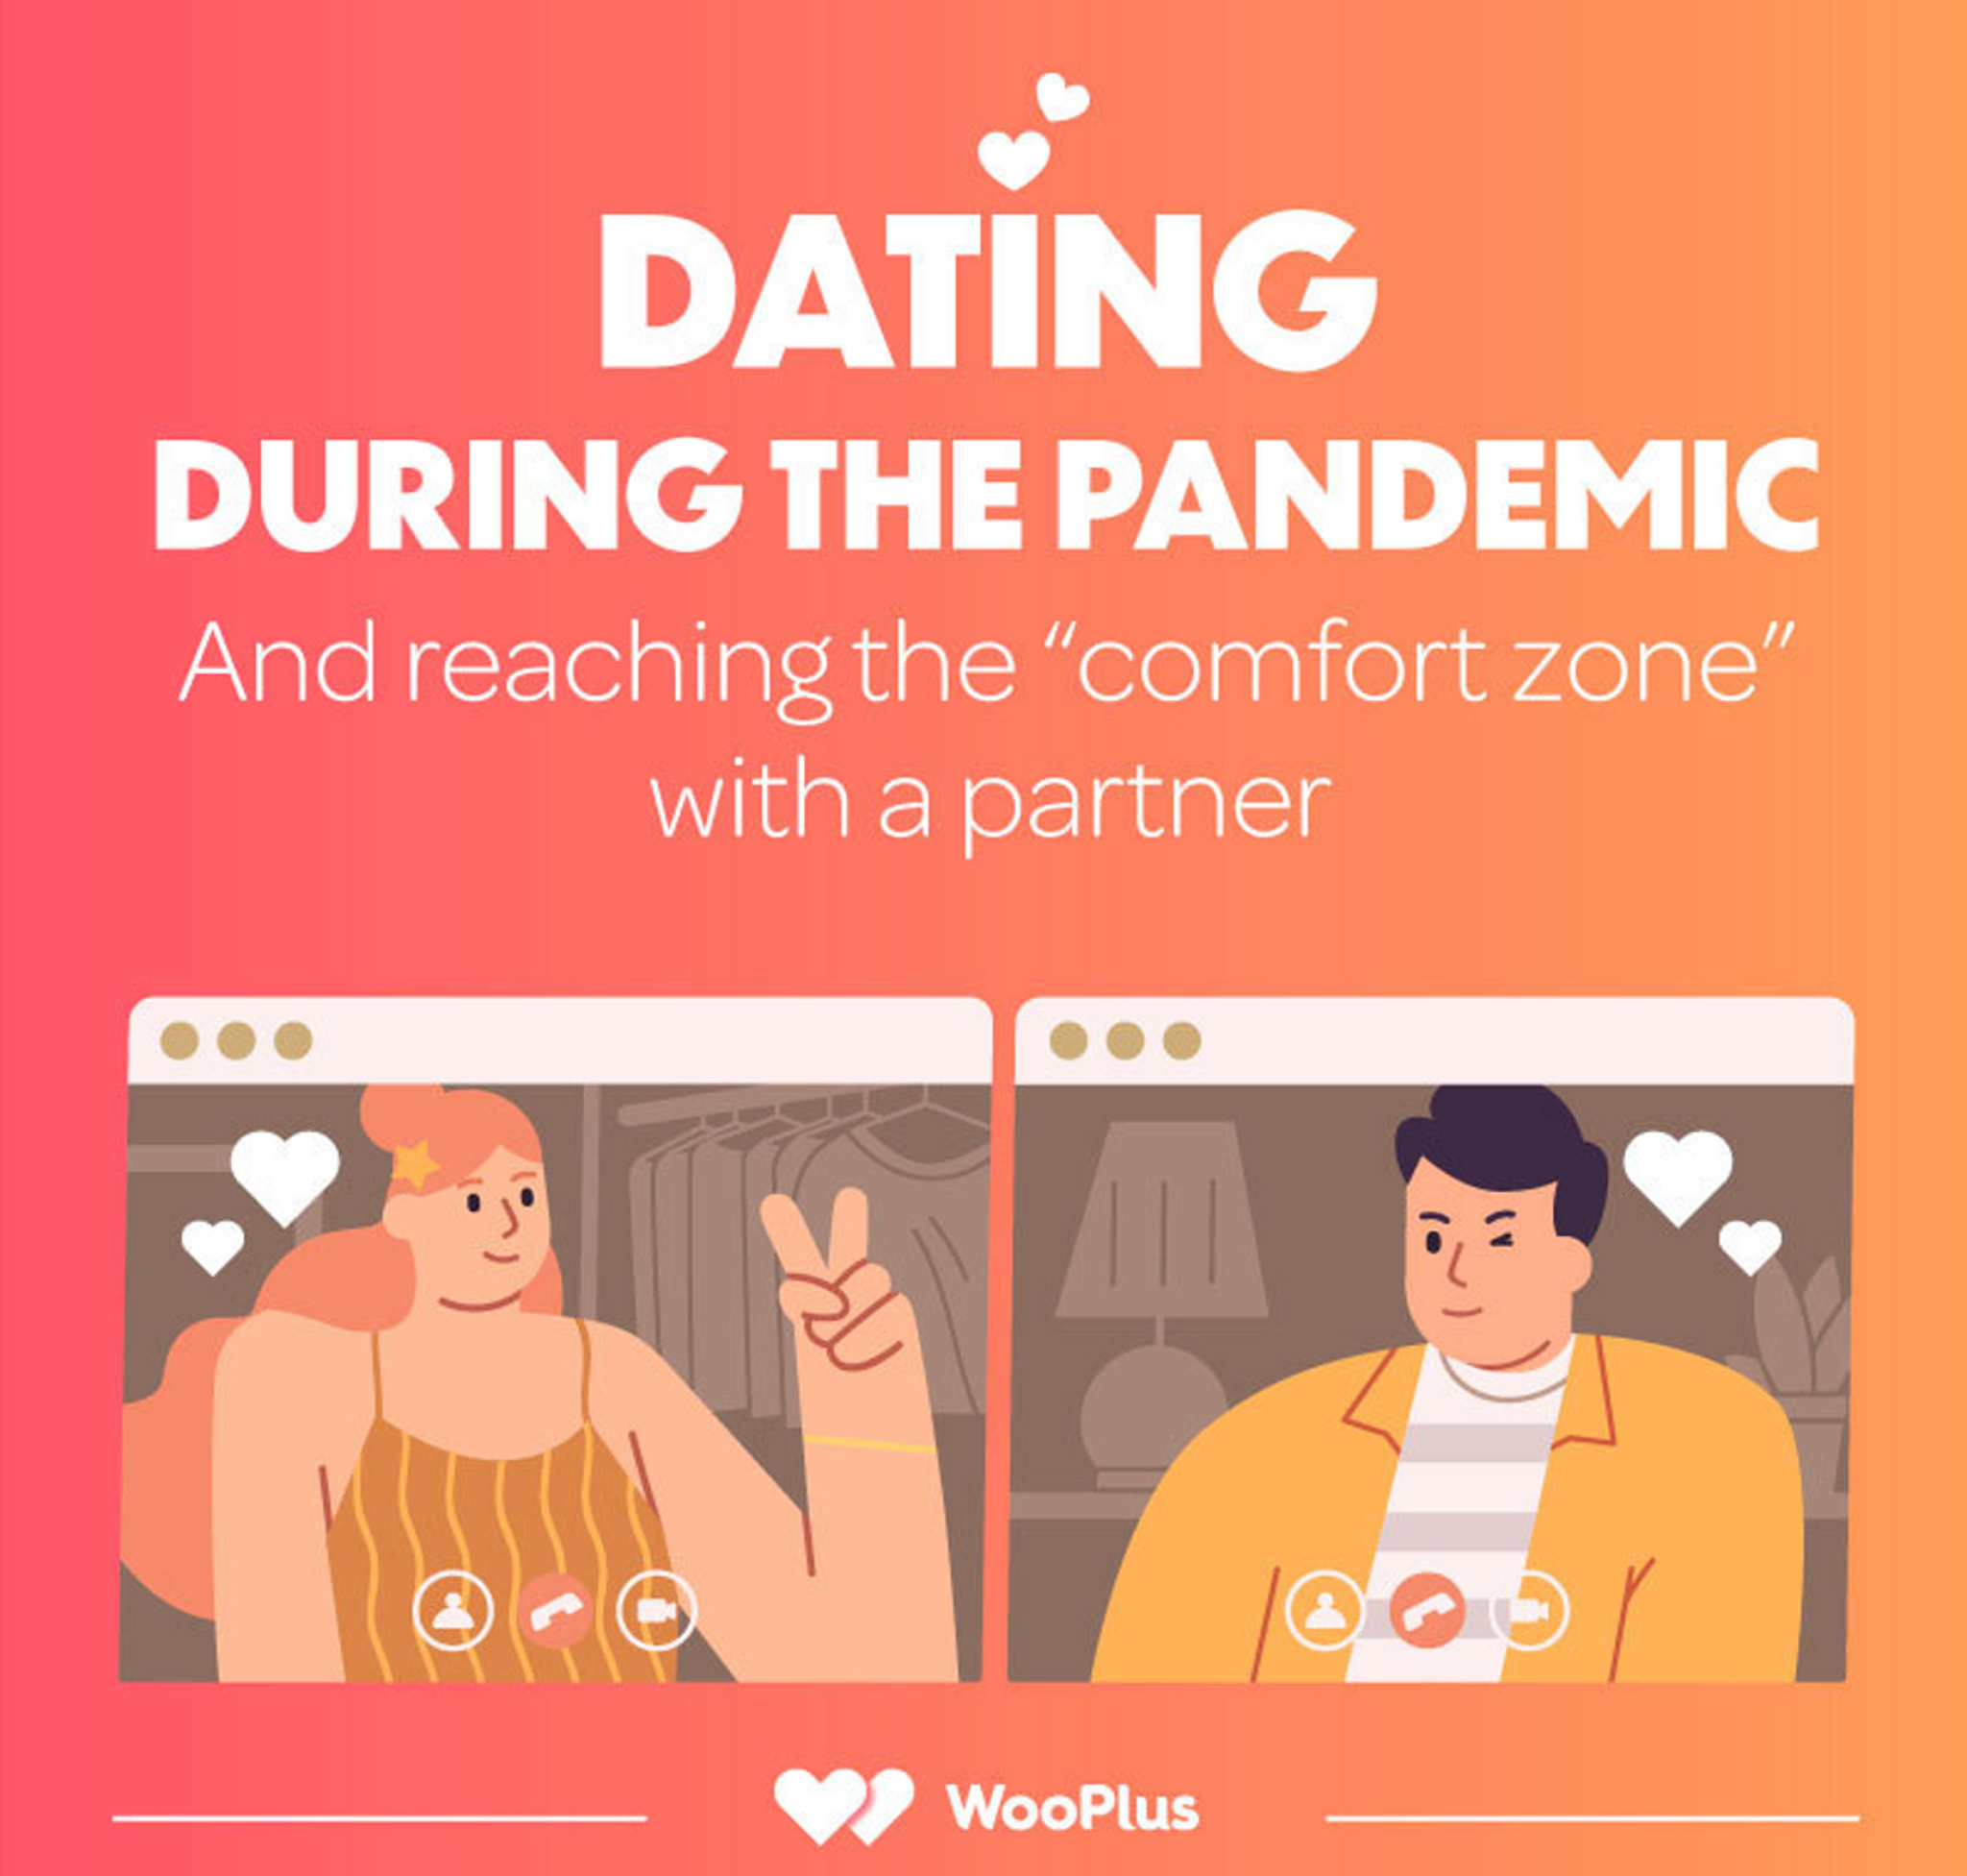 Love in the Age of Lockdown: The Coronavirus Pandemic Changed the Dating Game for Good